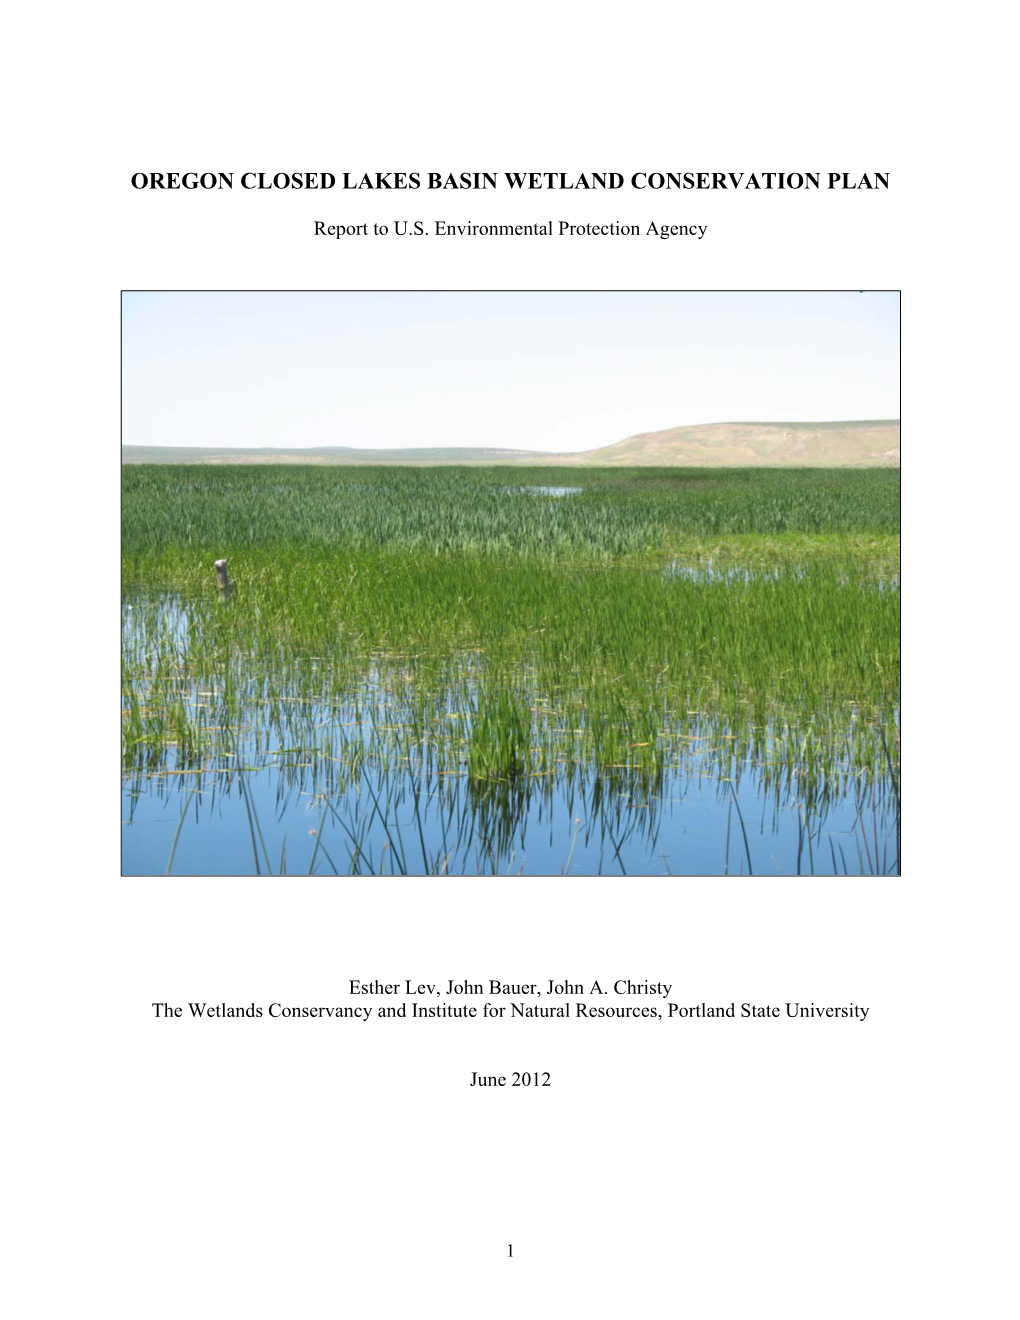 Conservation Plan for the Closed Lakes Basin